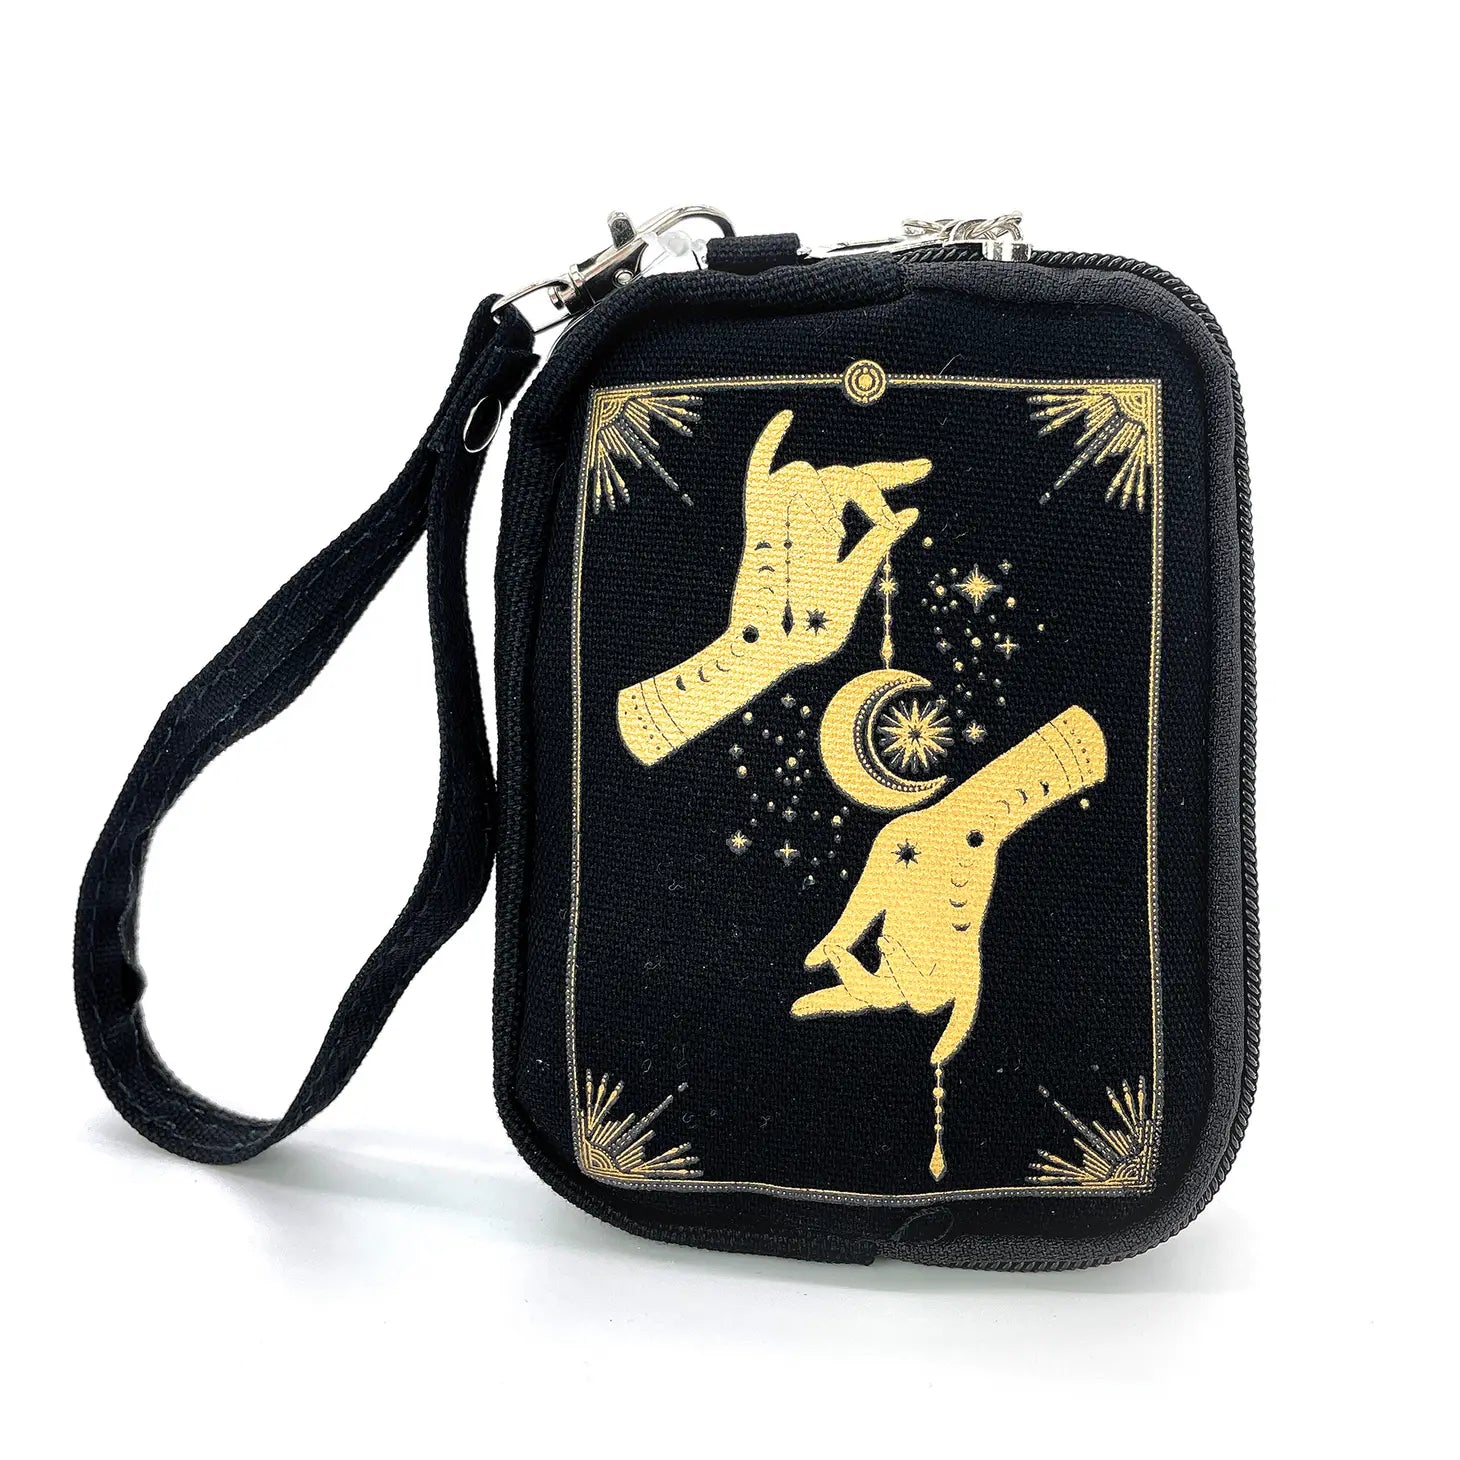 Black canvas rectangular pouch printed with a metallic gold design of a pair of hands and crescent moon surrounded by a celestial design and an Art Deco style rectangular border. Has two zipper closure compartments, and detachable wristlet strap. Front with design shown